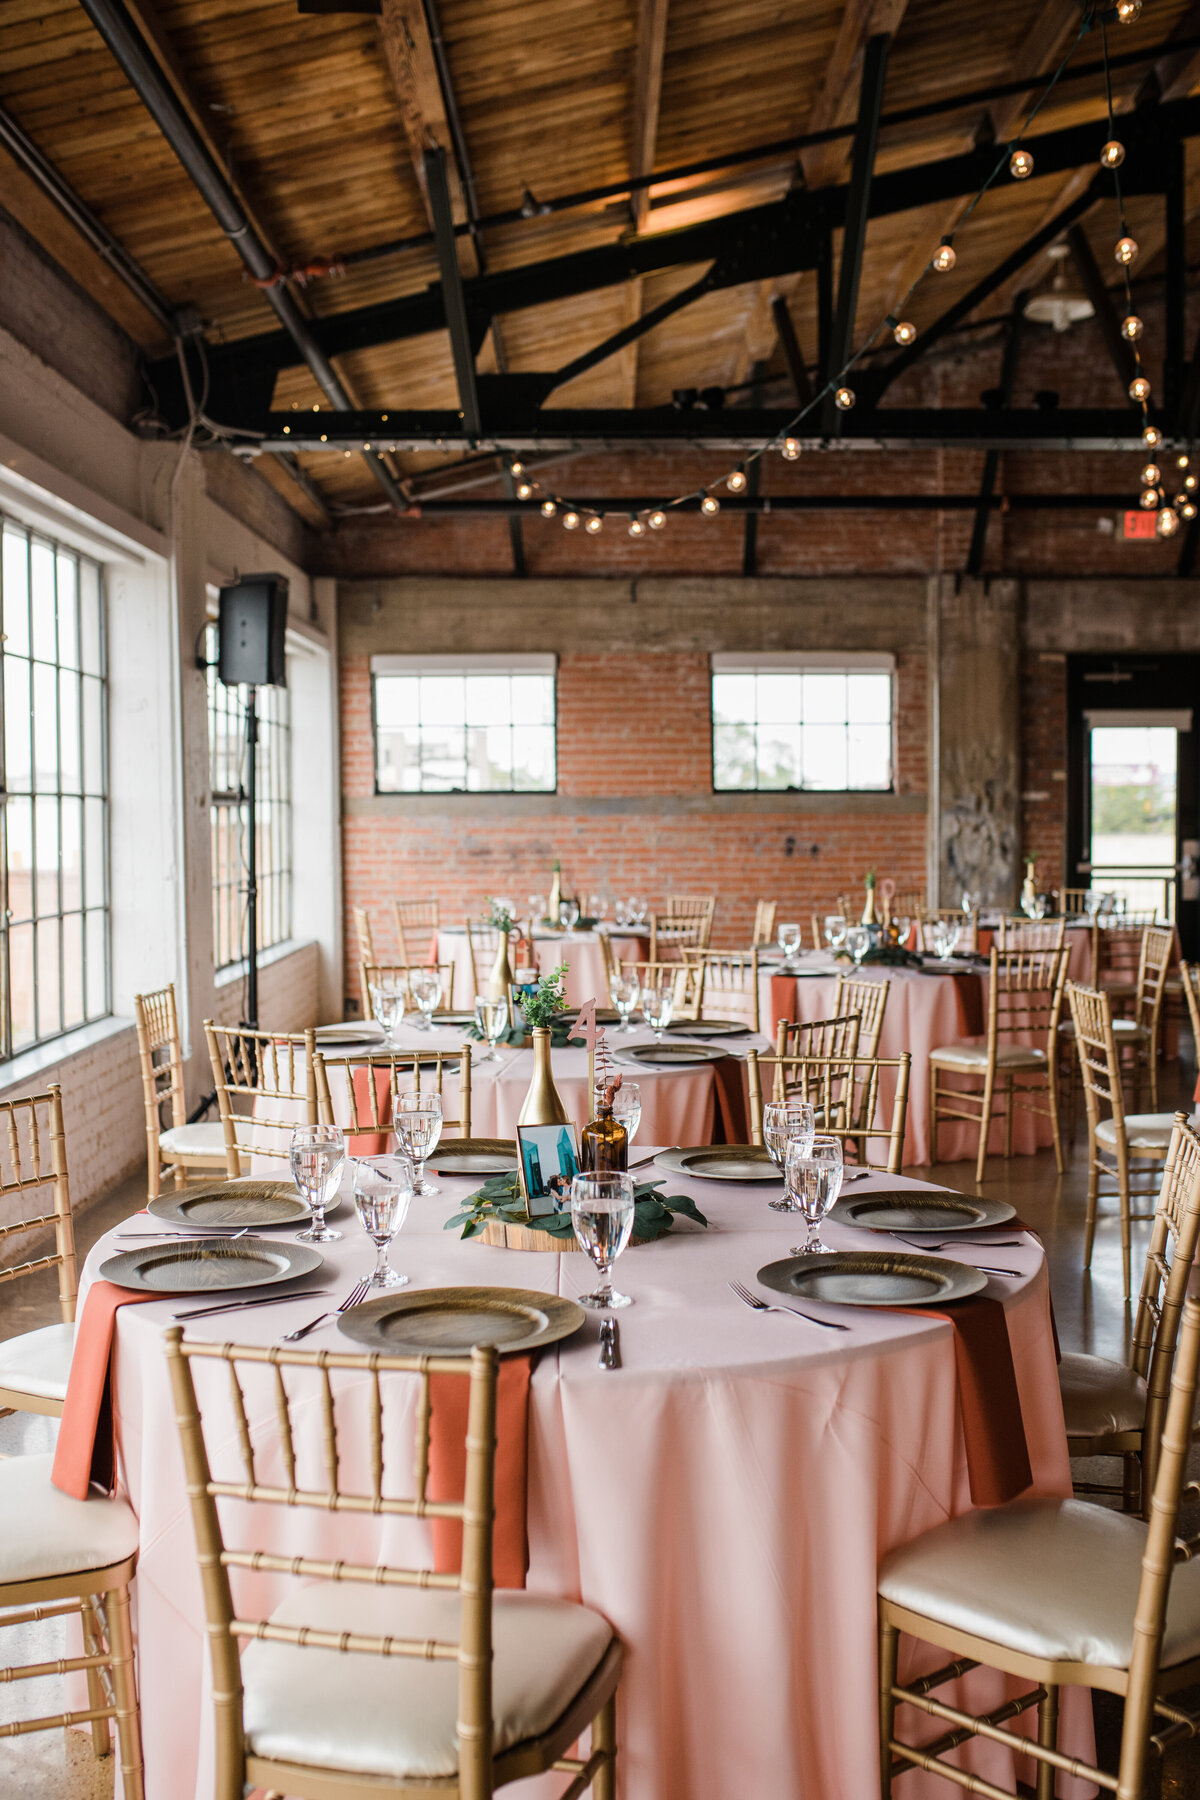 Room shot of a wedding reception at the Hickory Street Annex in Dallas, Texas. Multiple round tables can be seen with pale pink tablecloths, dark brown plates, cutlery, glasses, and a centerpiece containing a vase with flowers, a  vase with a light, a framed photo, and a table number.